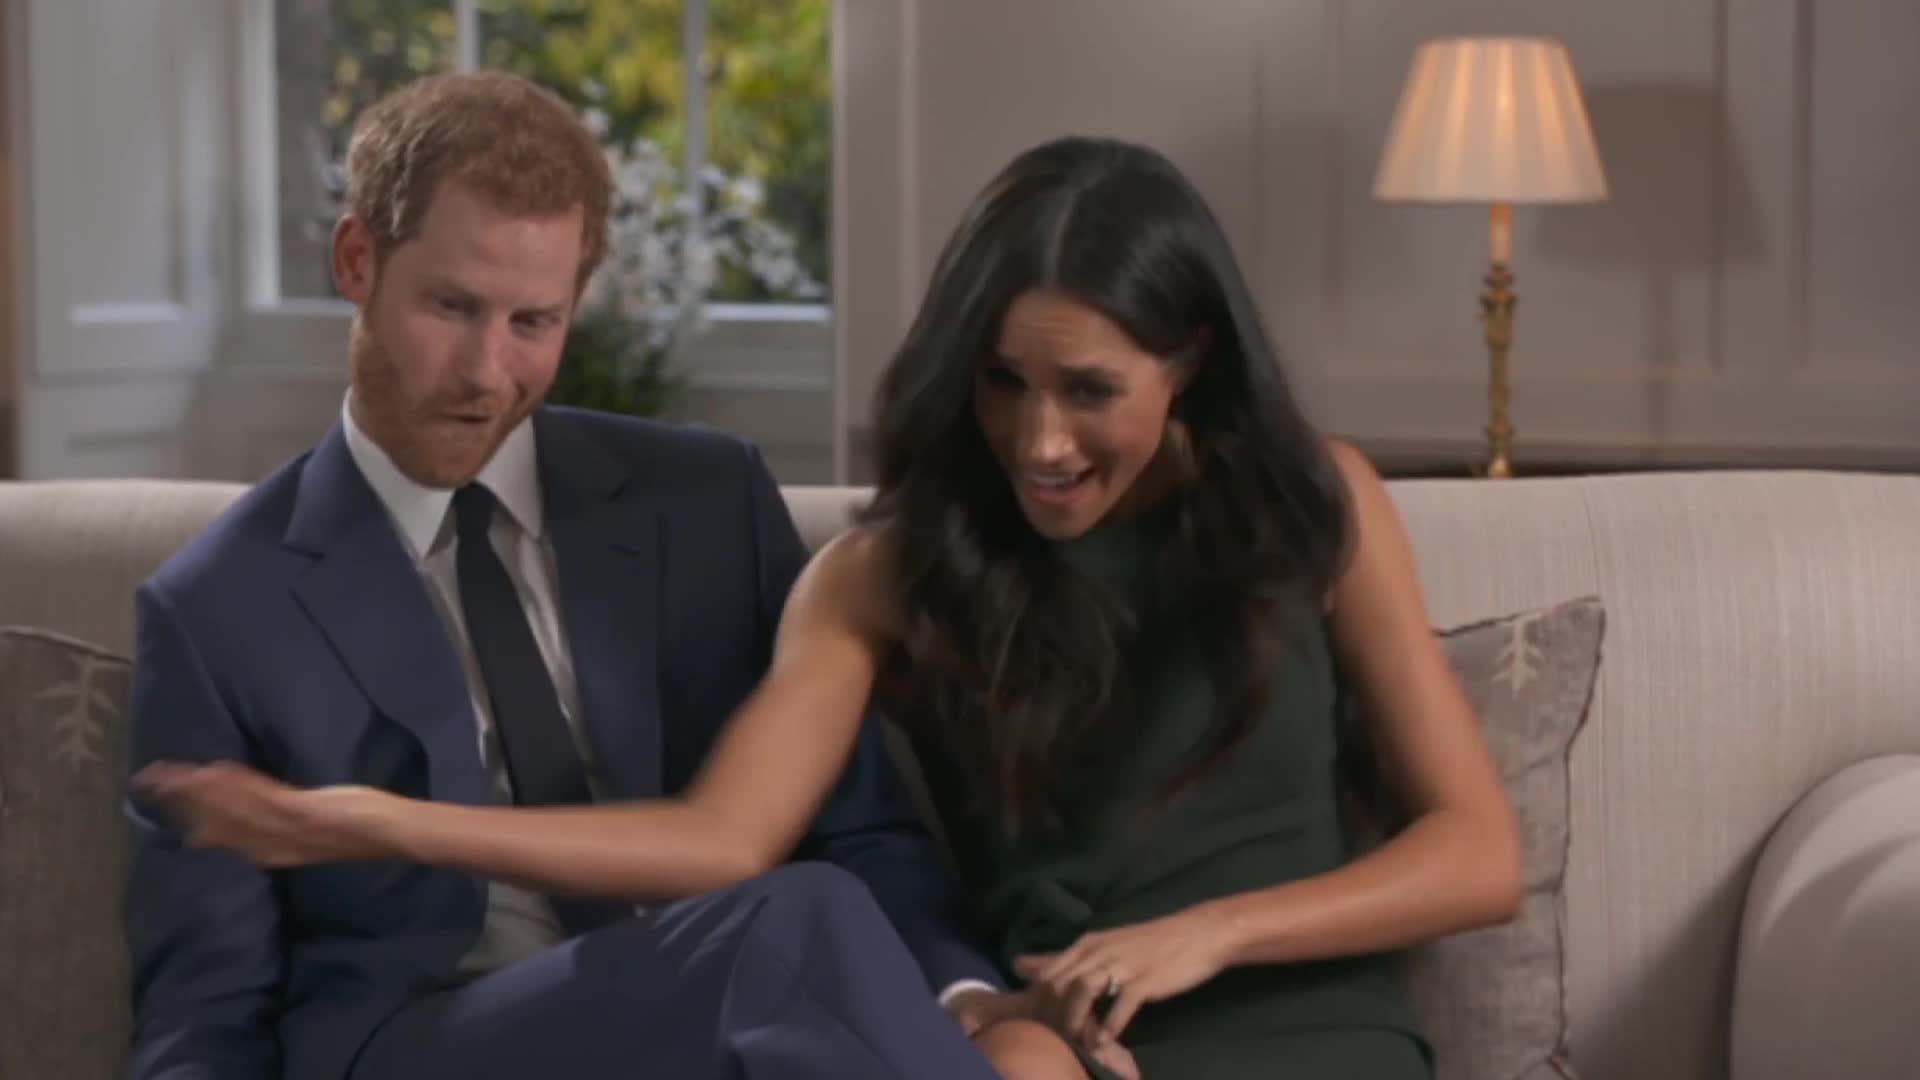 porn searches for meghan markle go through the roof as lusty royalists set their sights on raunchy sex scenes